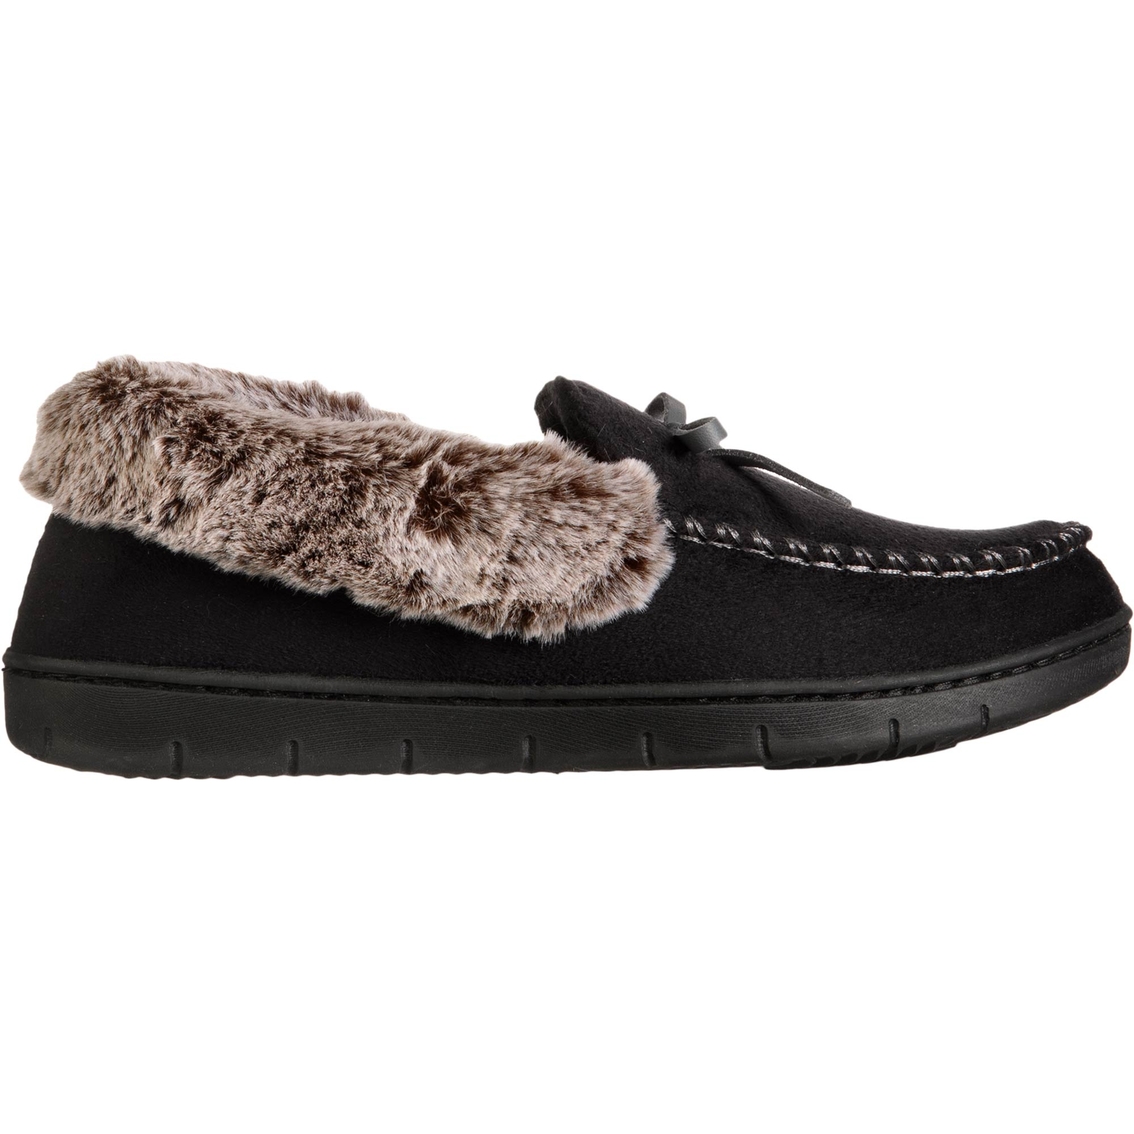 Totes Isotoner Women's Microsuede Rae Moccasin Slippers - Image 2 of 3